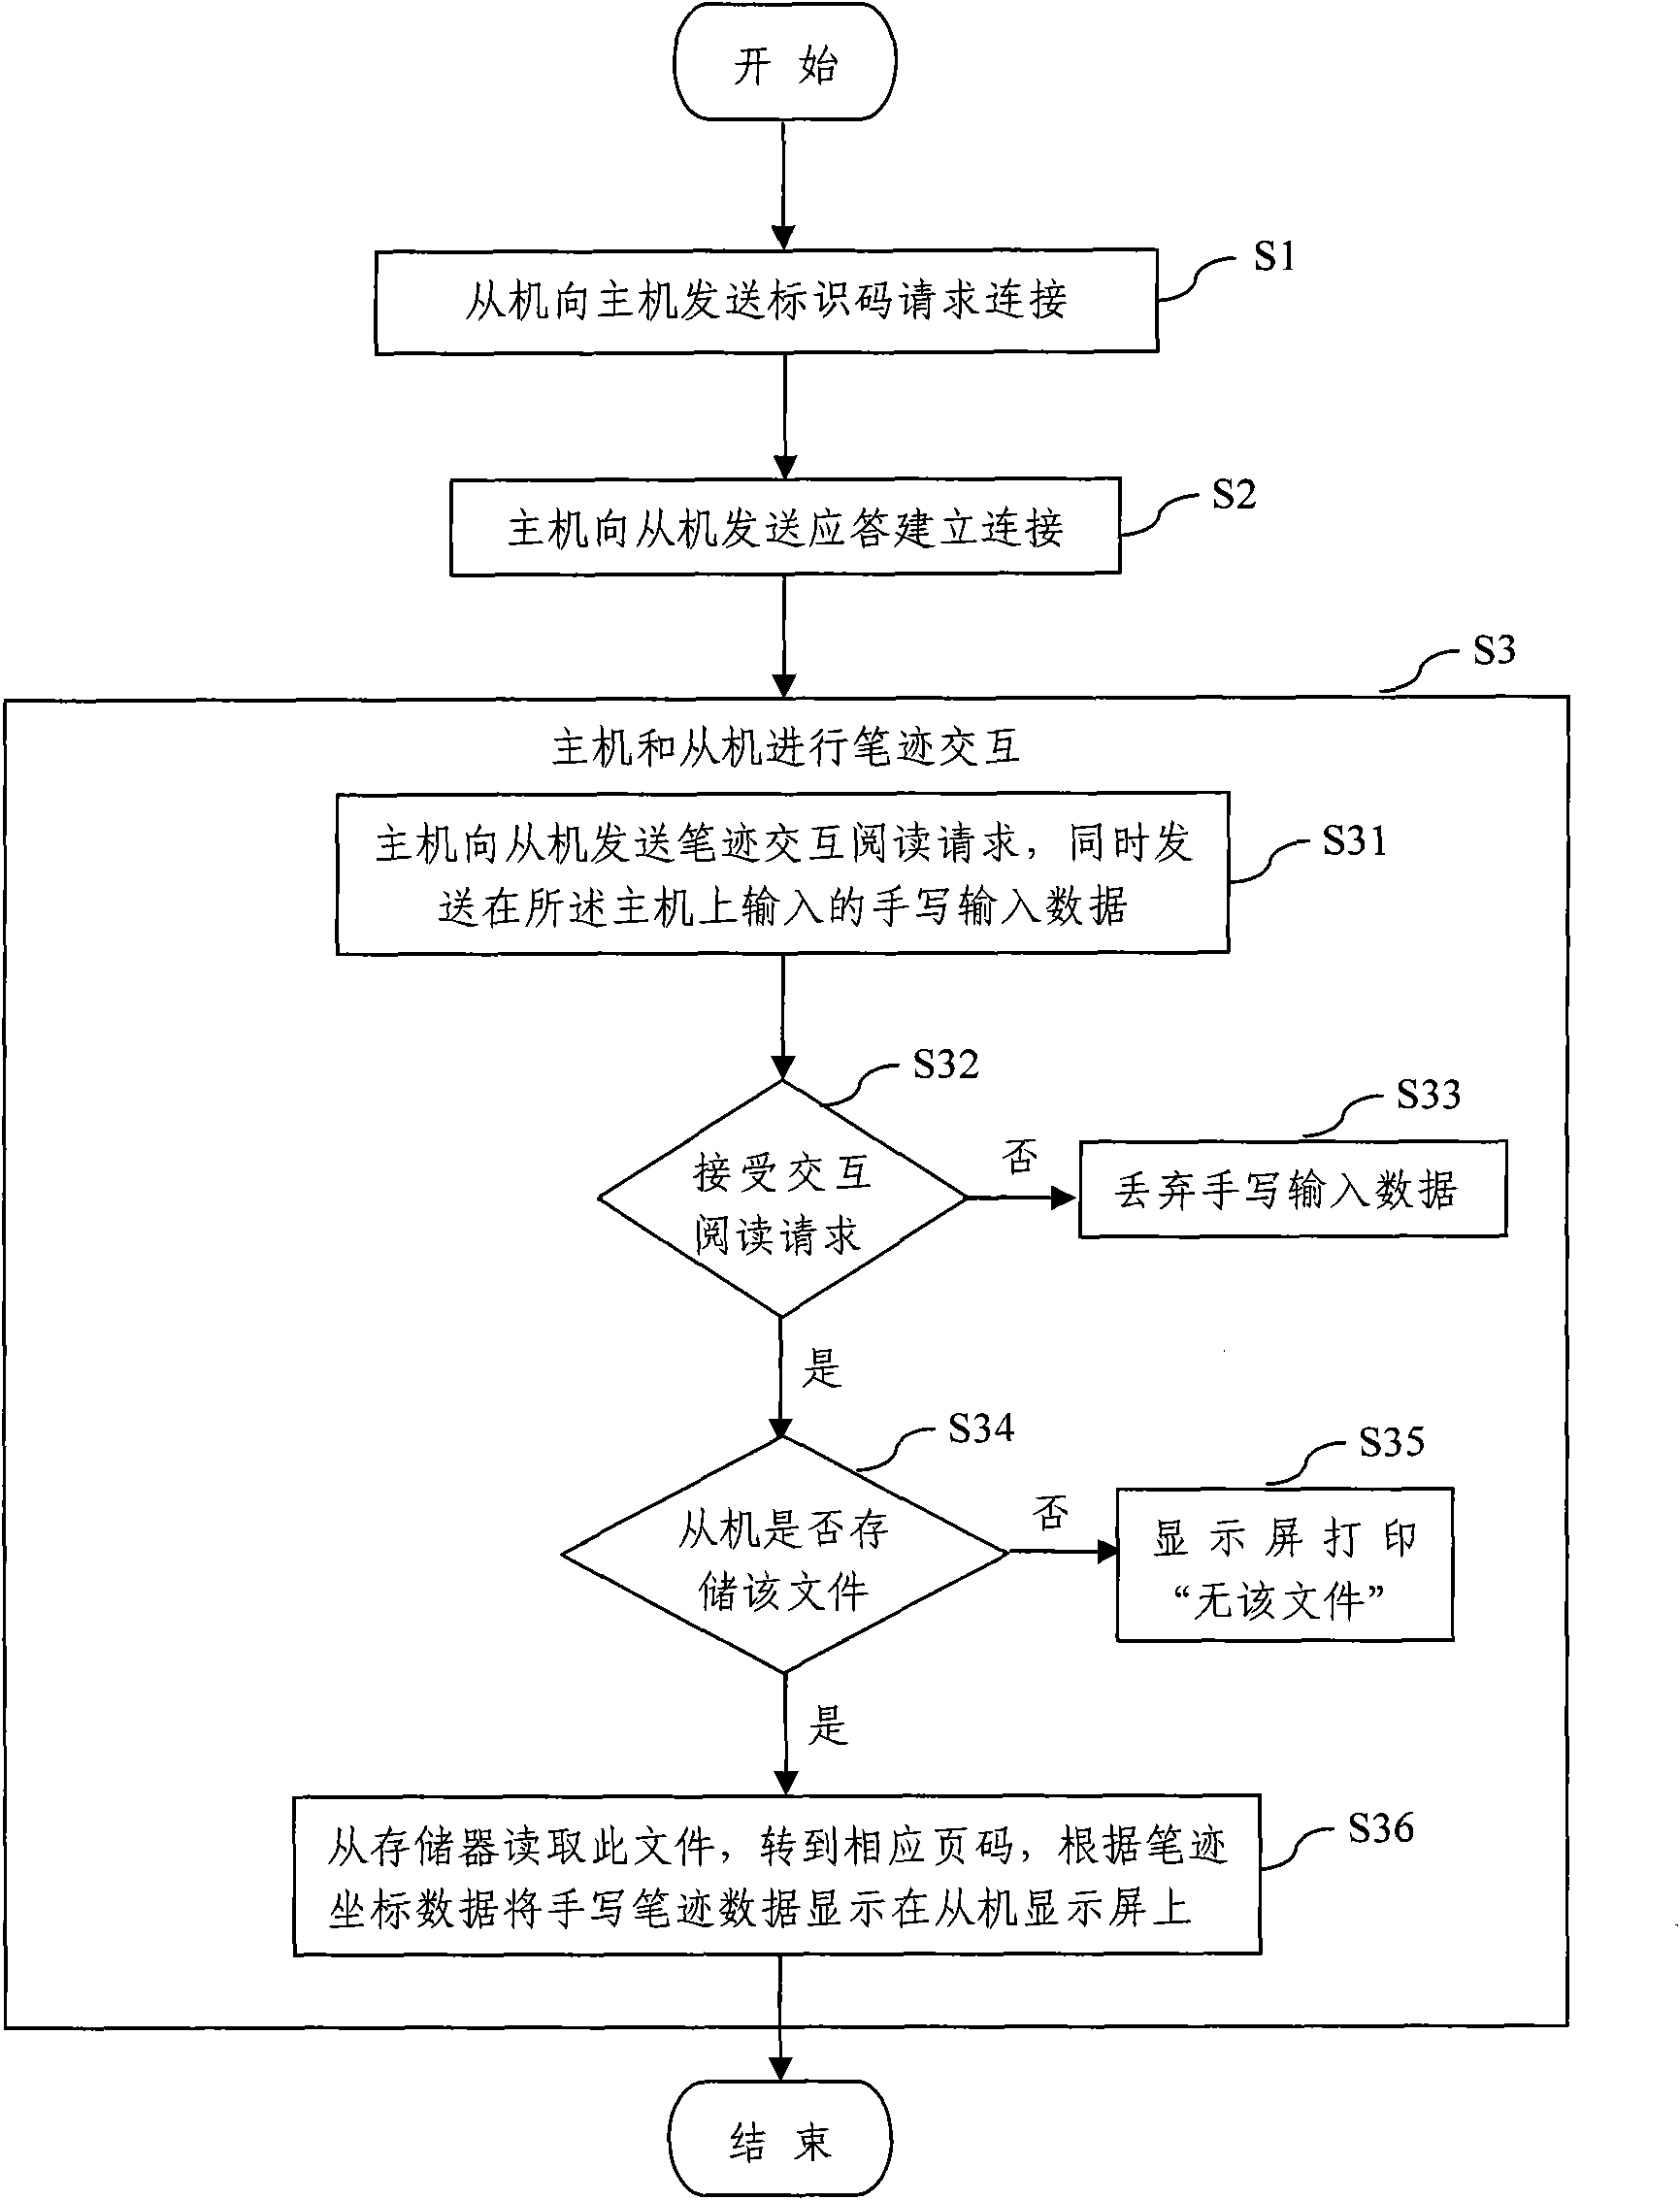 Handwriting interaction reader, system and method